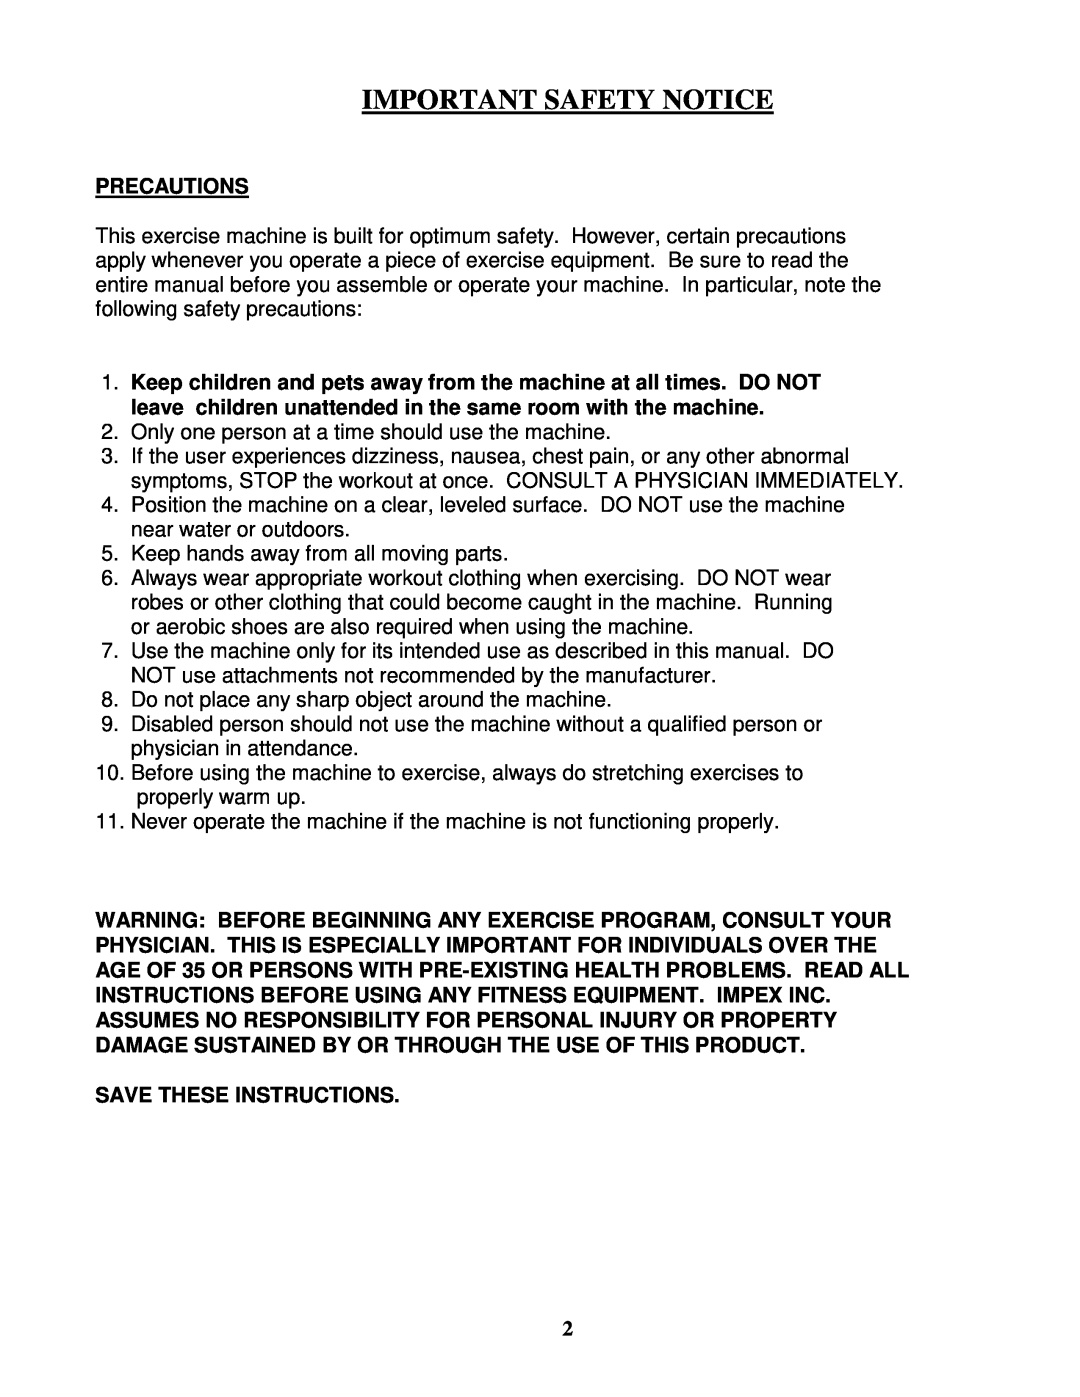 Impex PHE 2000 manual Important Safety Notice, Precautions, Save These Instructions 